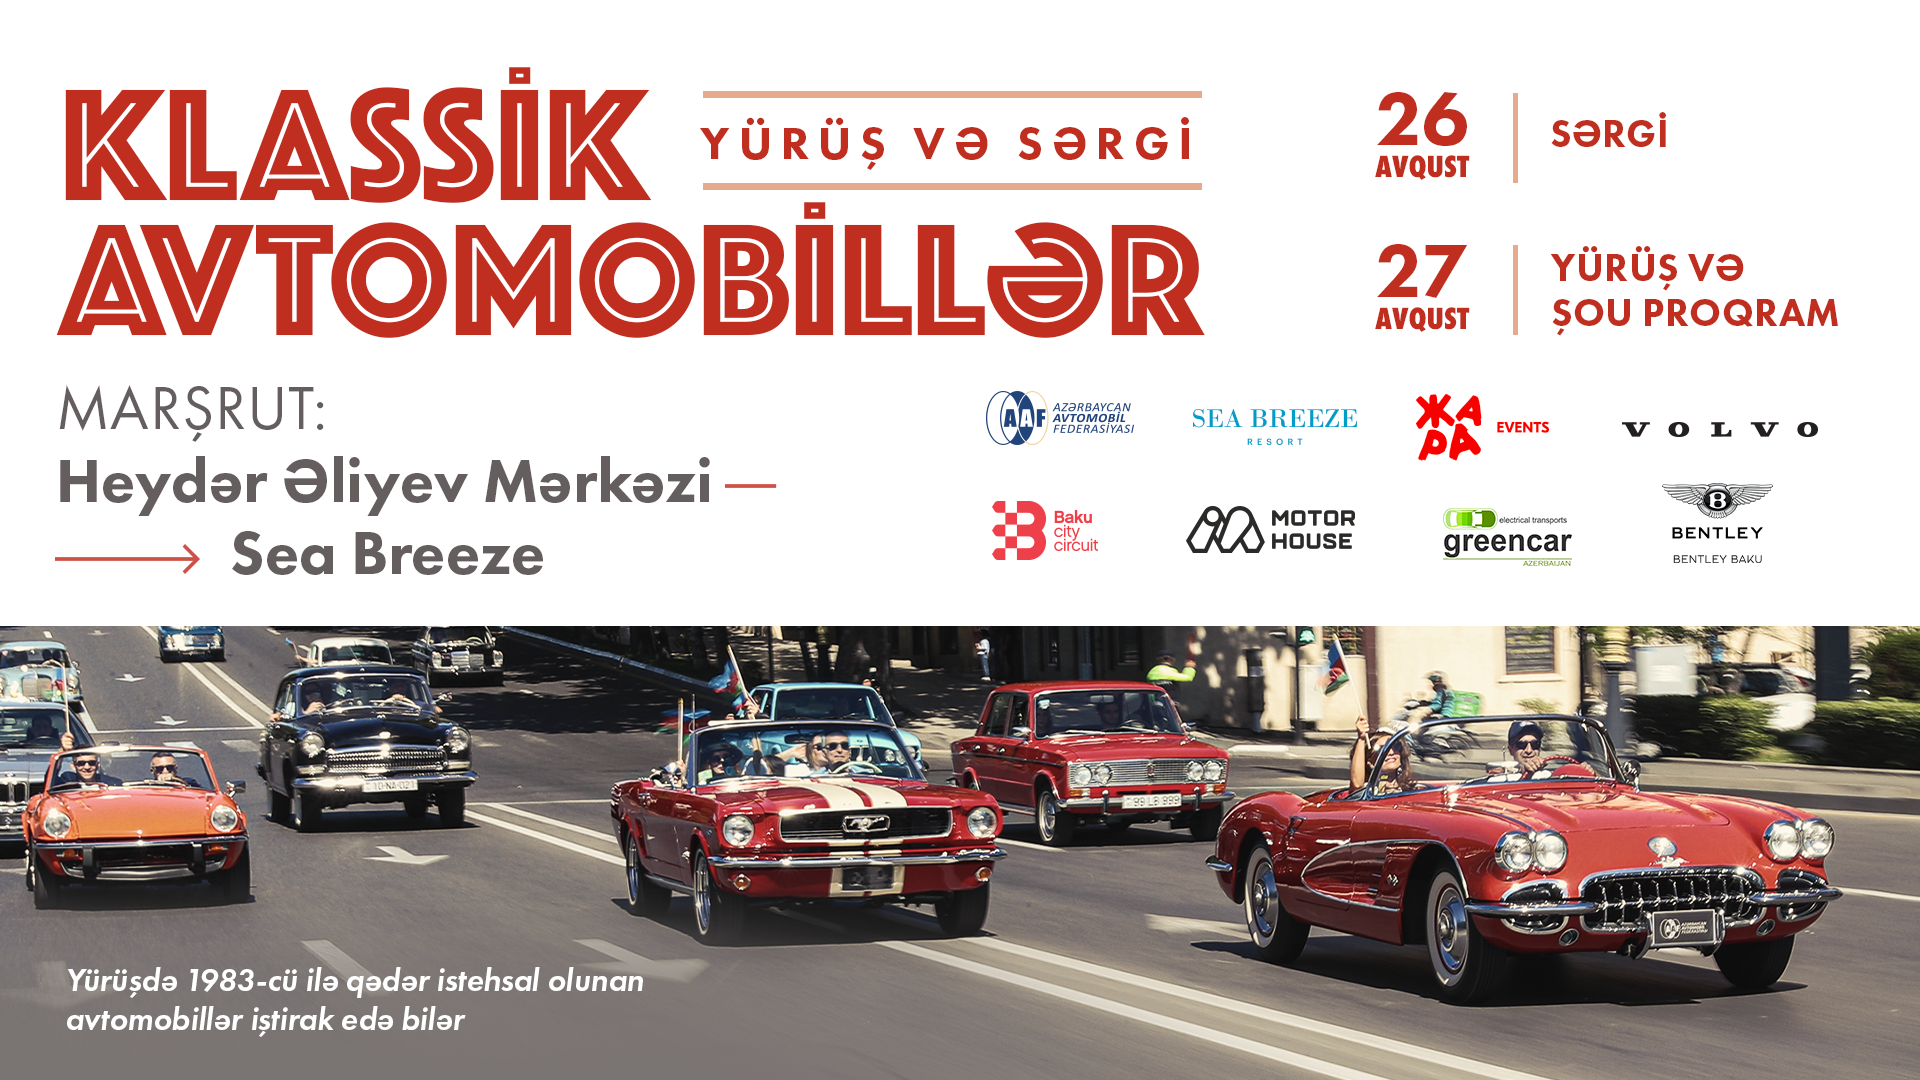 Exhibition of classic cars to be held in Baku this weekend